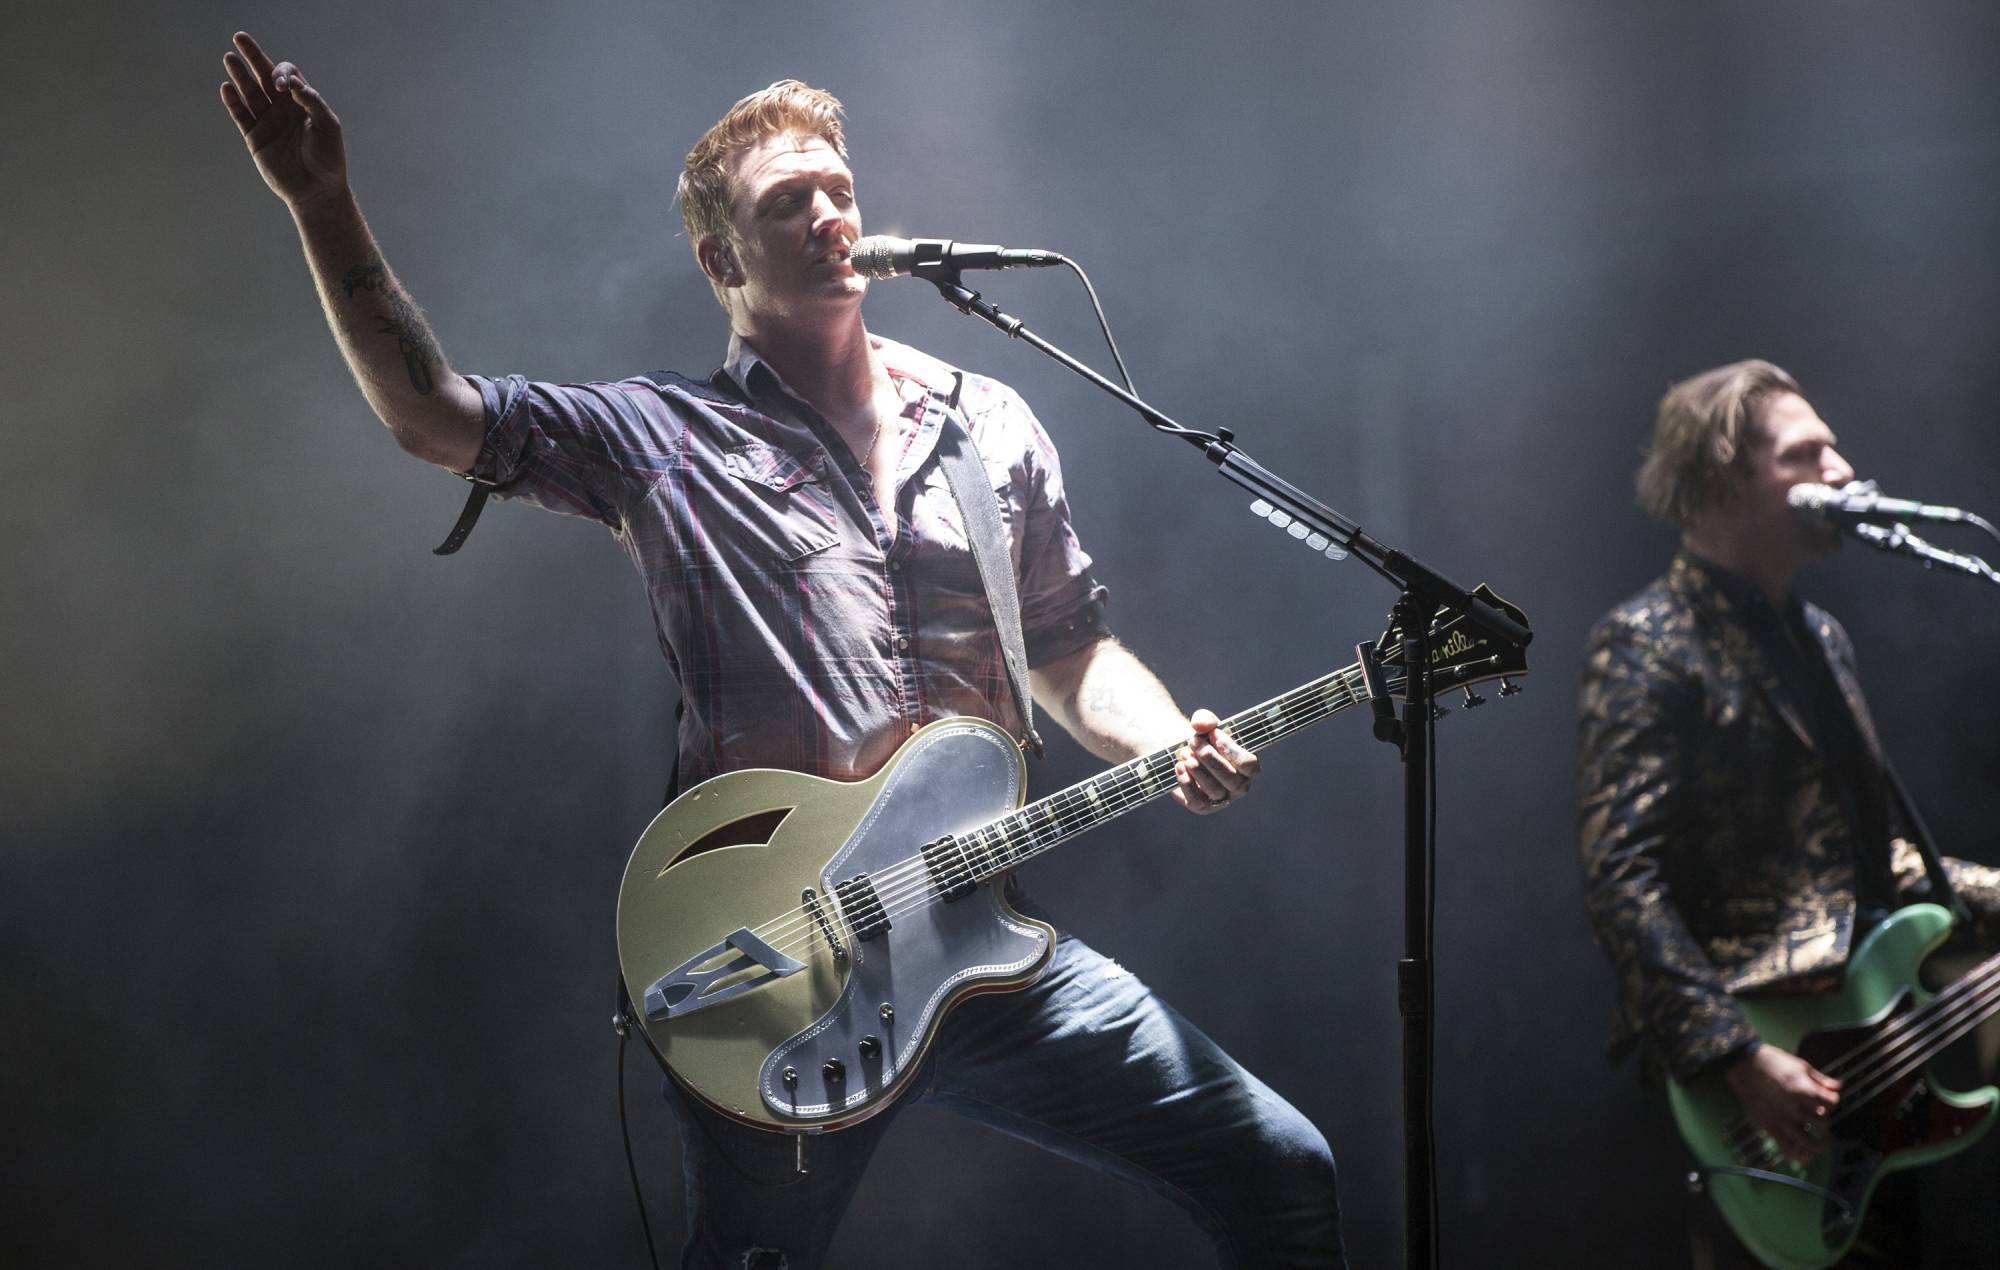 Singer/guitarist Josh Homme of Queens of the Stone Age performs at Charlotte Motor Speedway on May 6, 2018 in Charlotte, North Carolina. Credit: Jeff Hahne/Getty